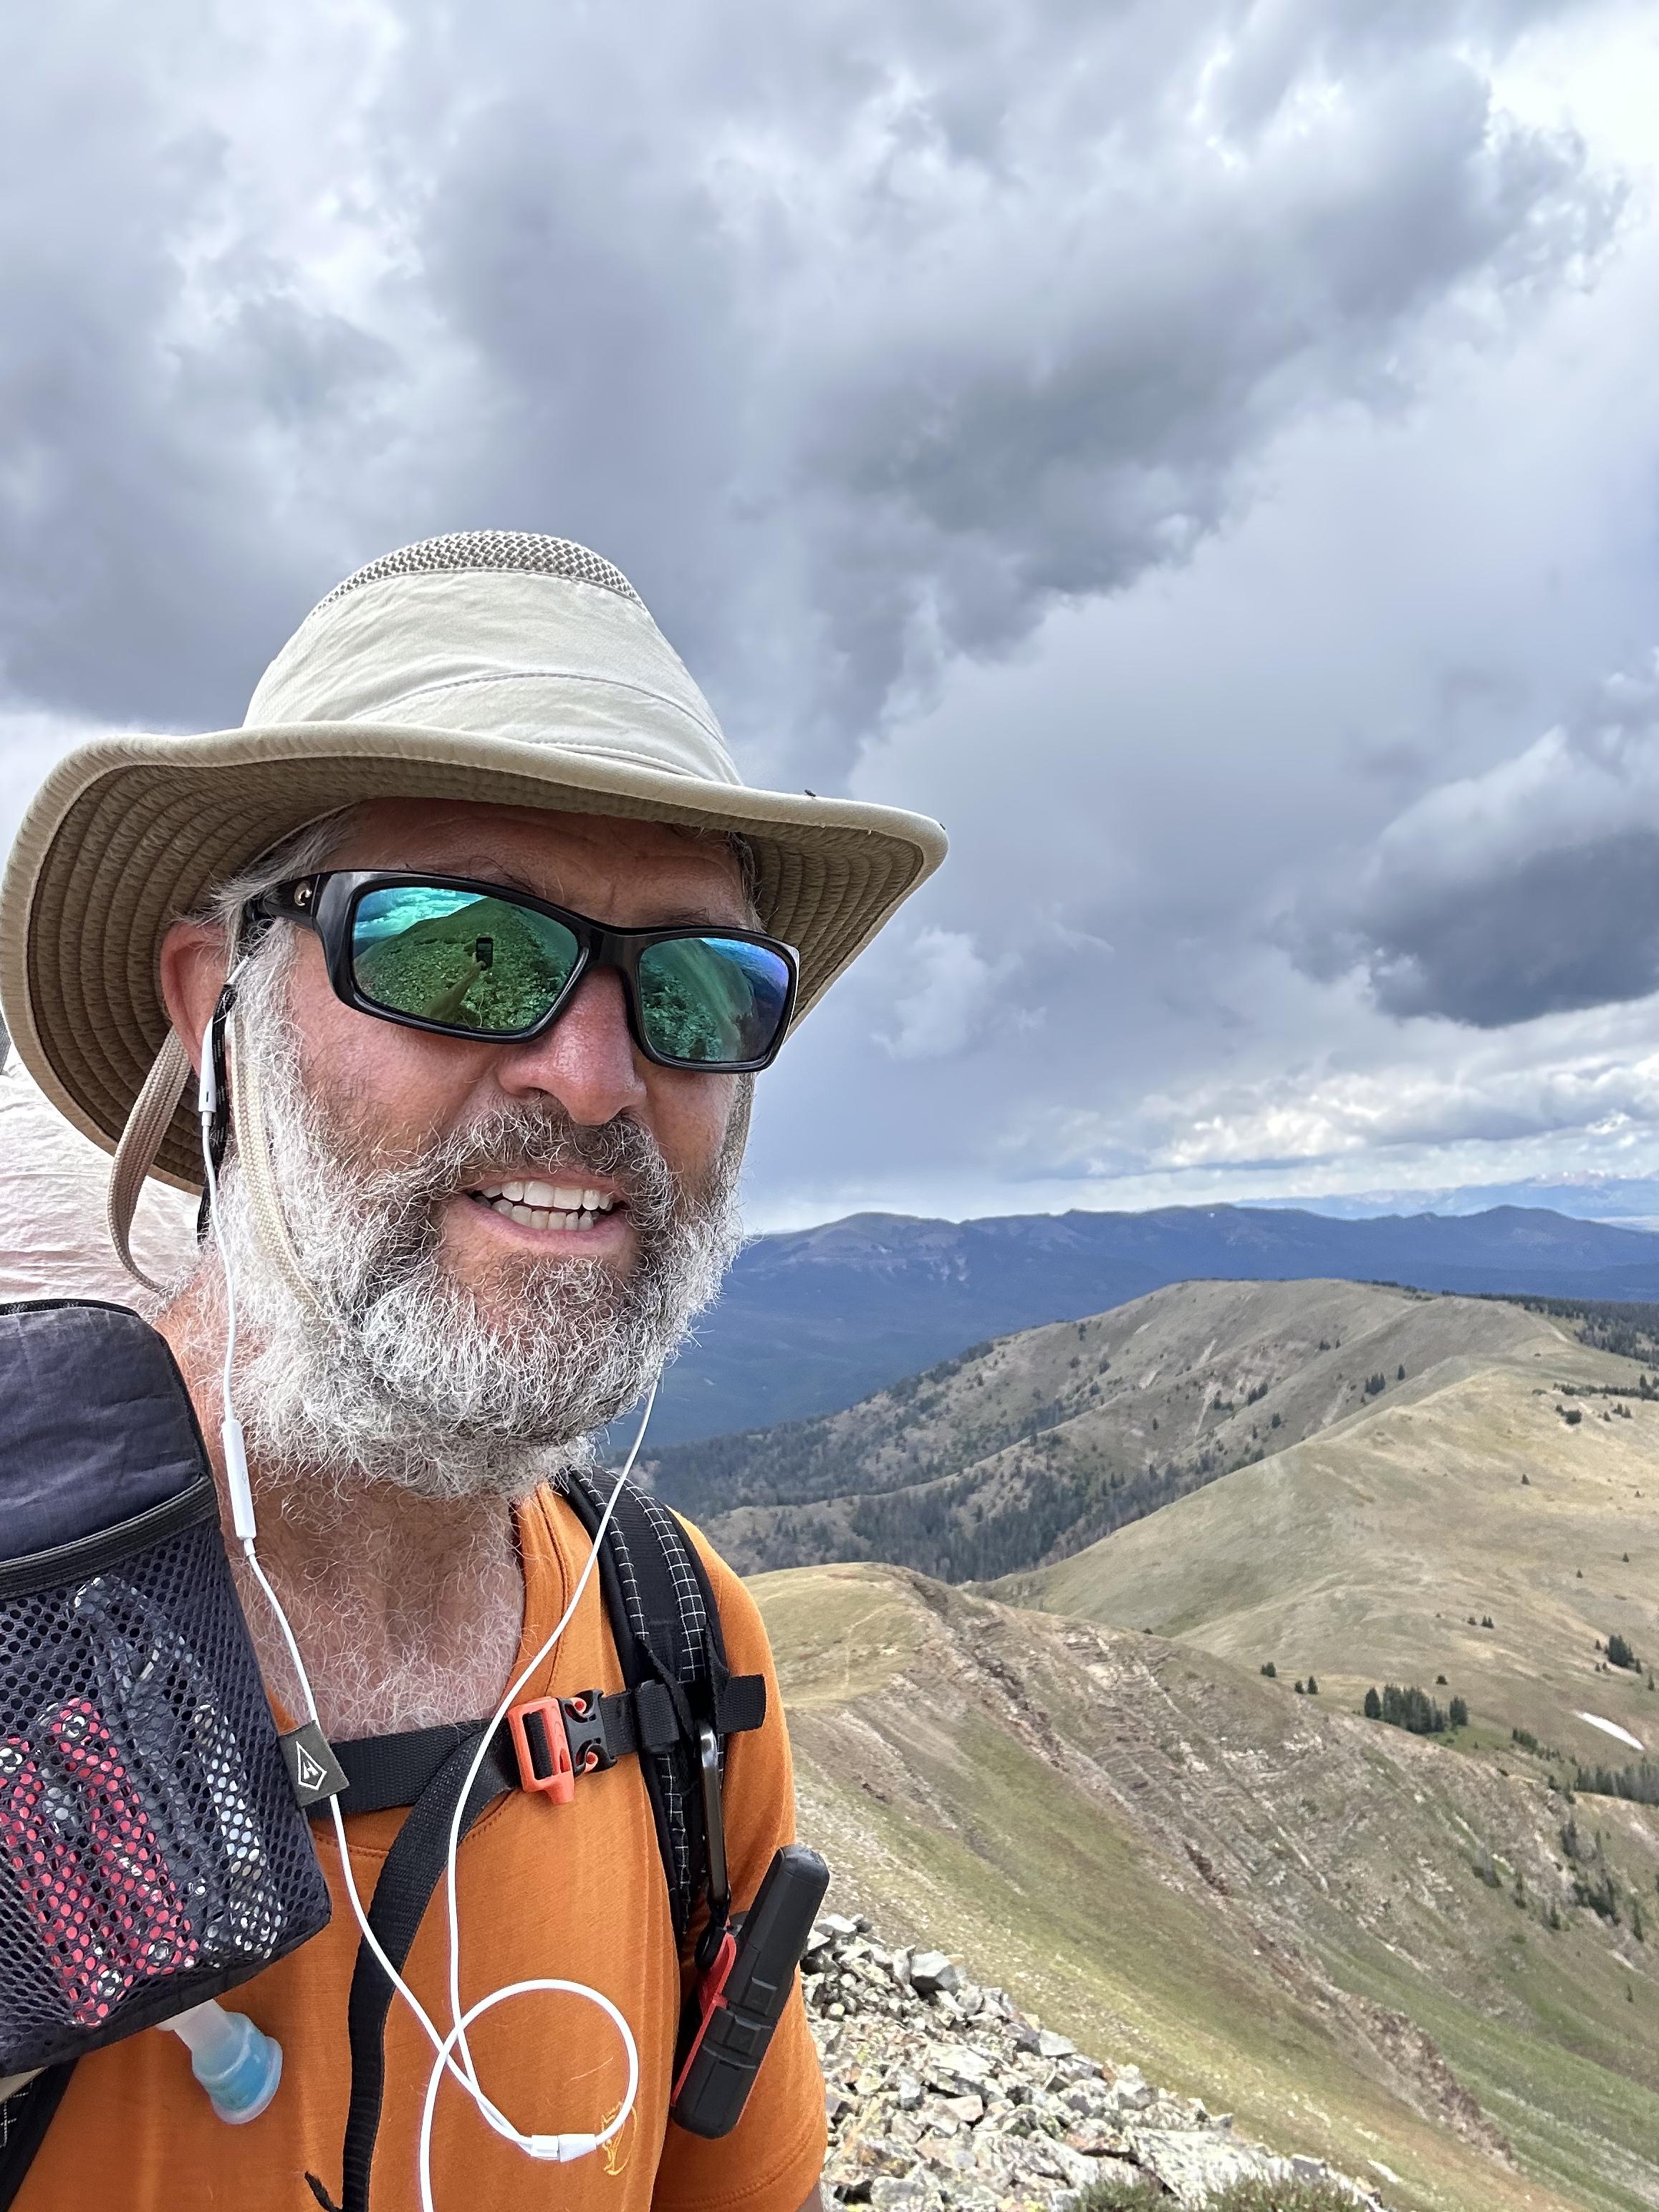 Tom, near the end of his journey, traveling over Parkview Mountain, Colorado, 12,000 feet above sea level.